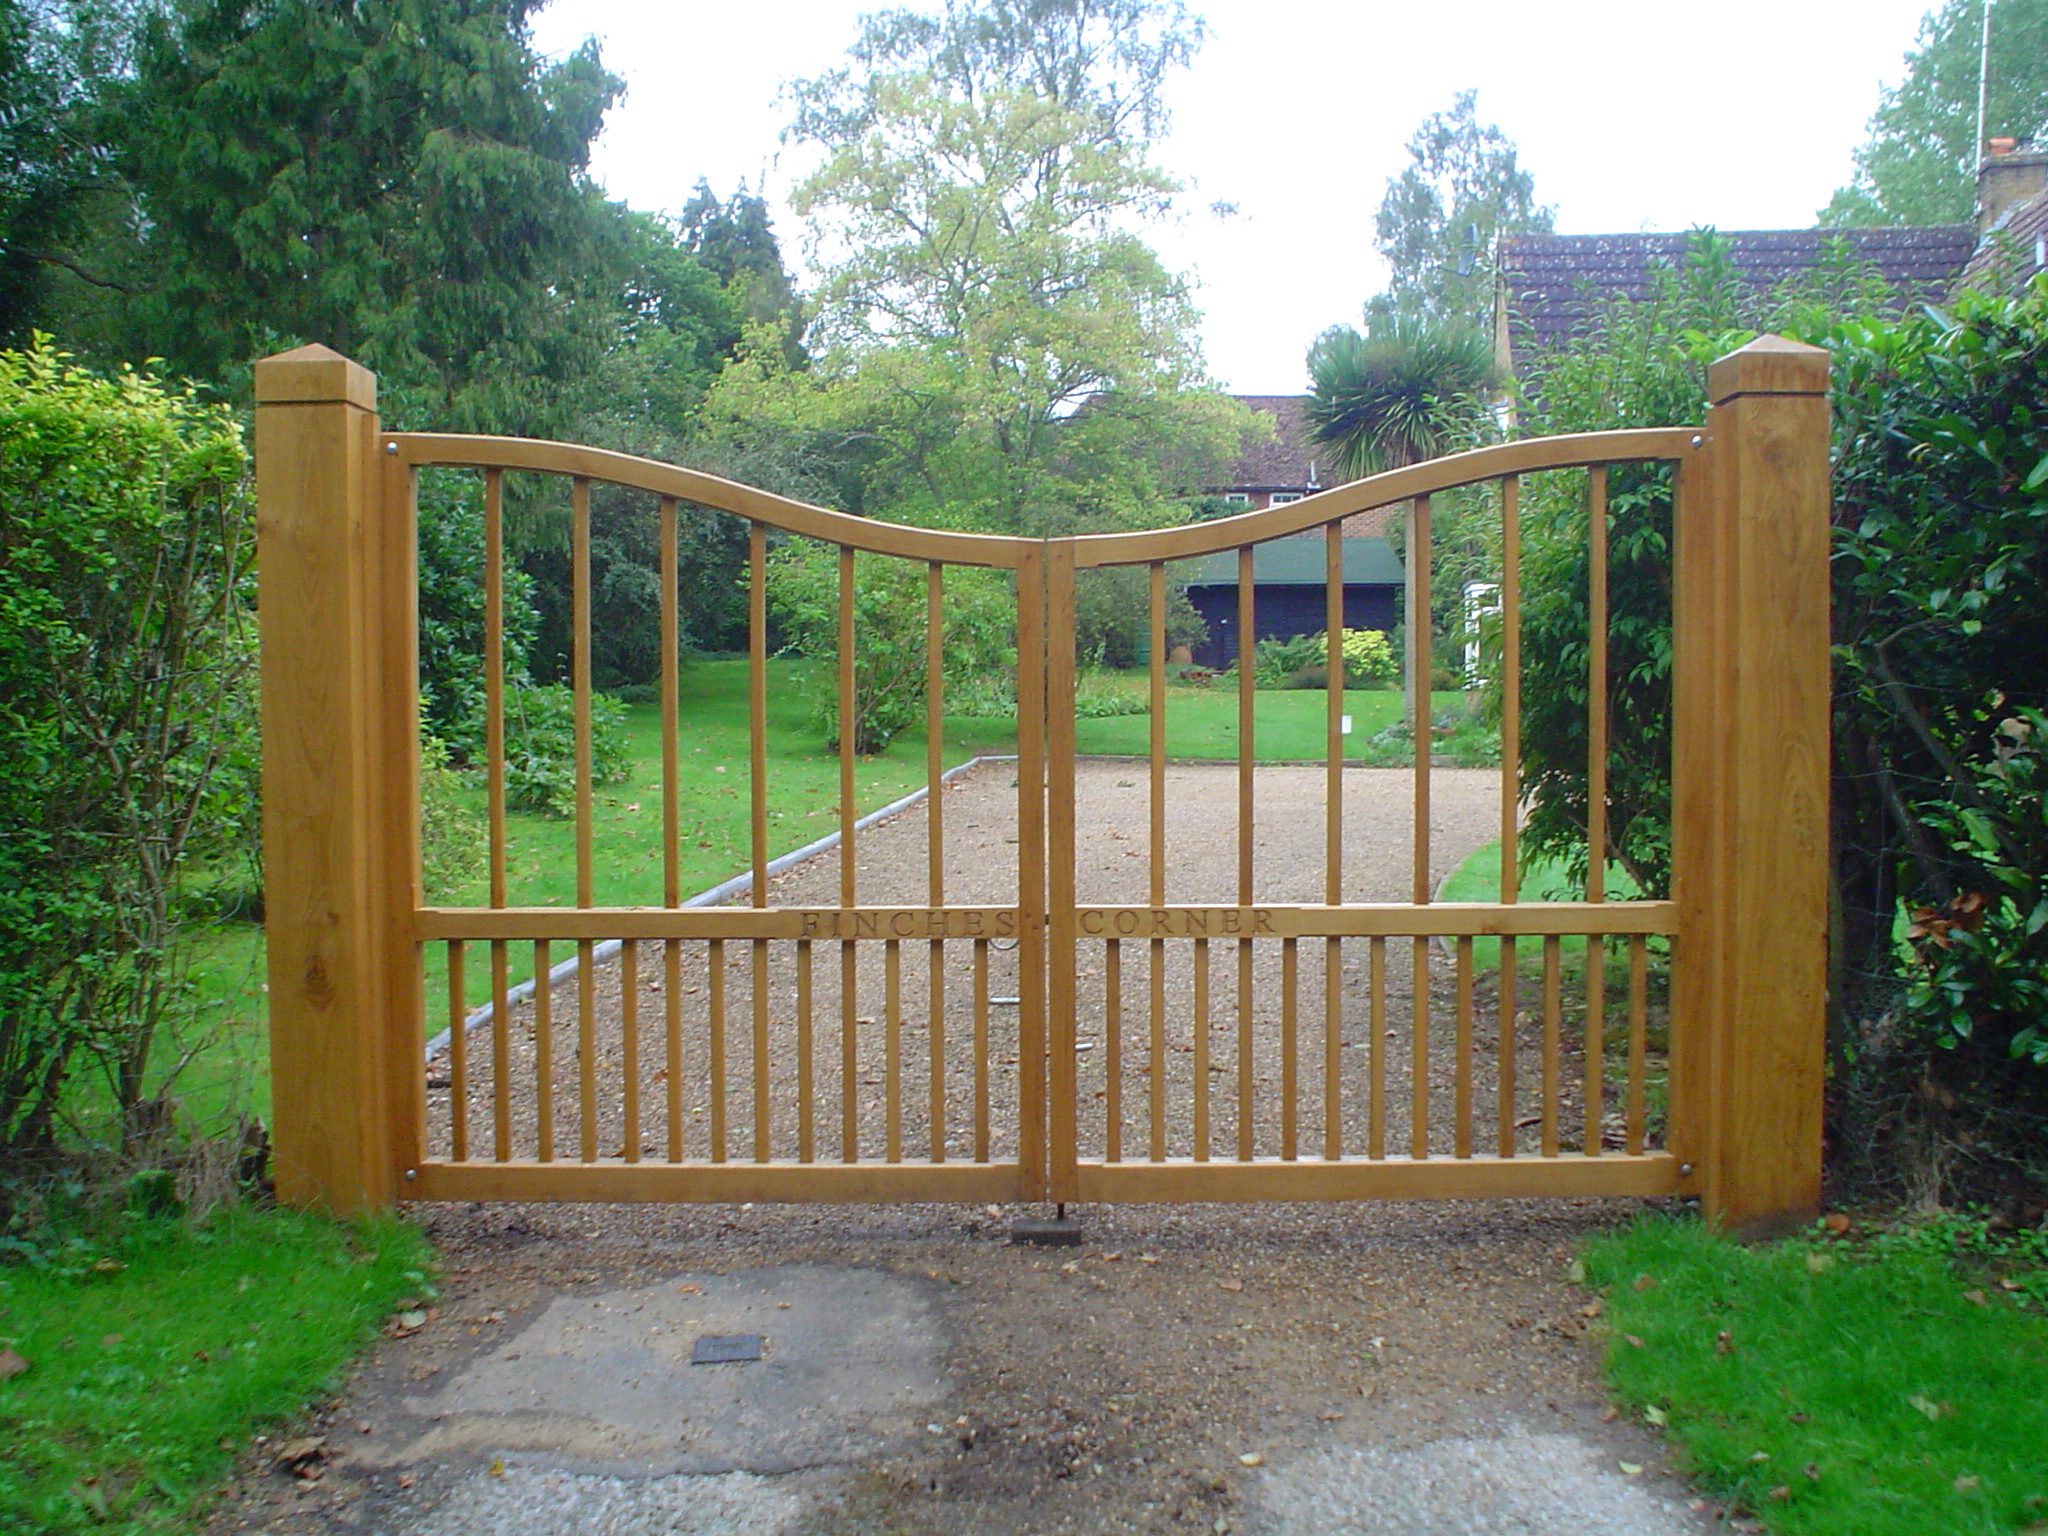 Driveway gates for safety